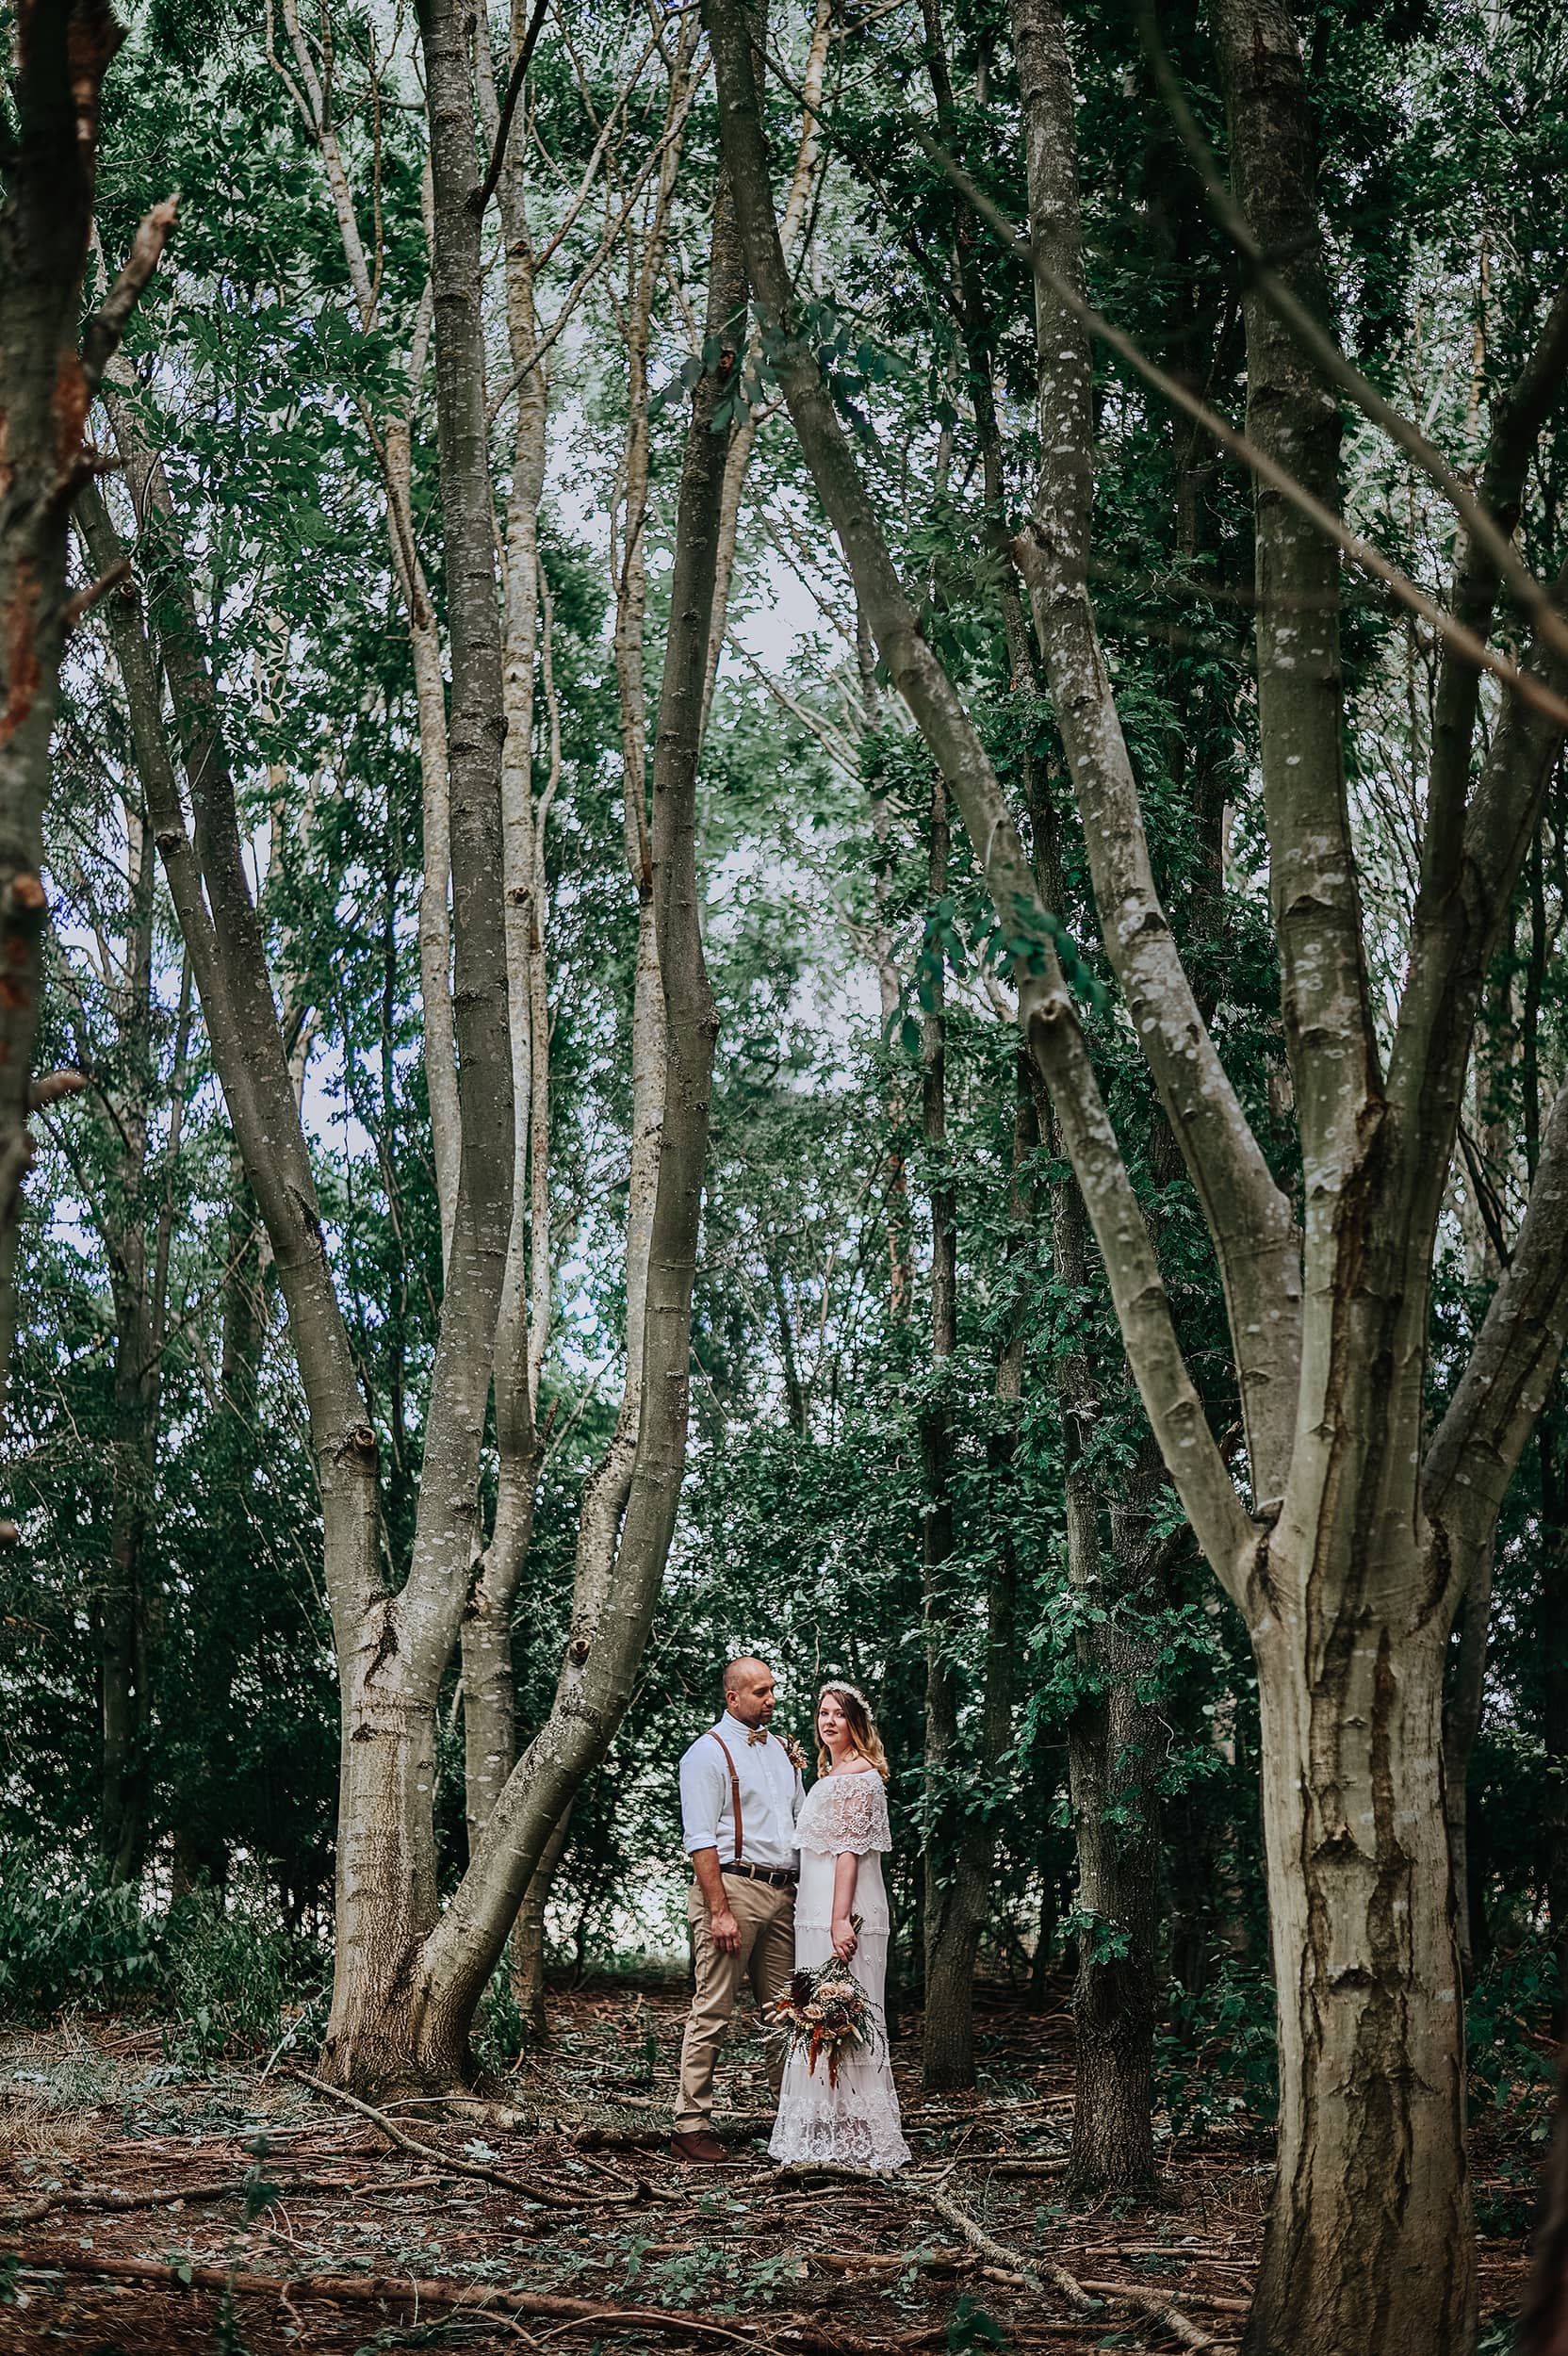 Couple in boho wedding attire at Browning Bros wedding venue for their woodland theme elopement.